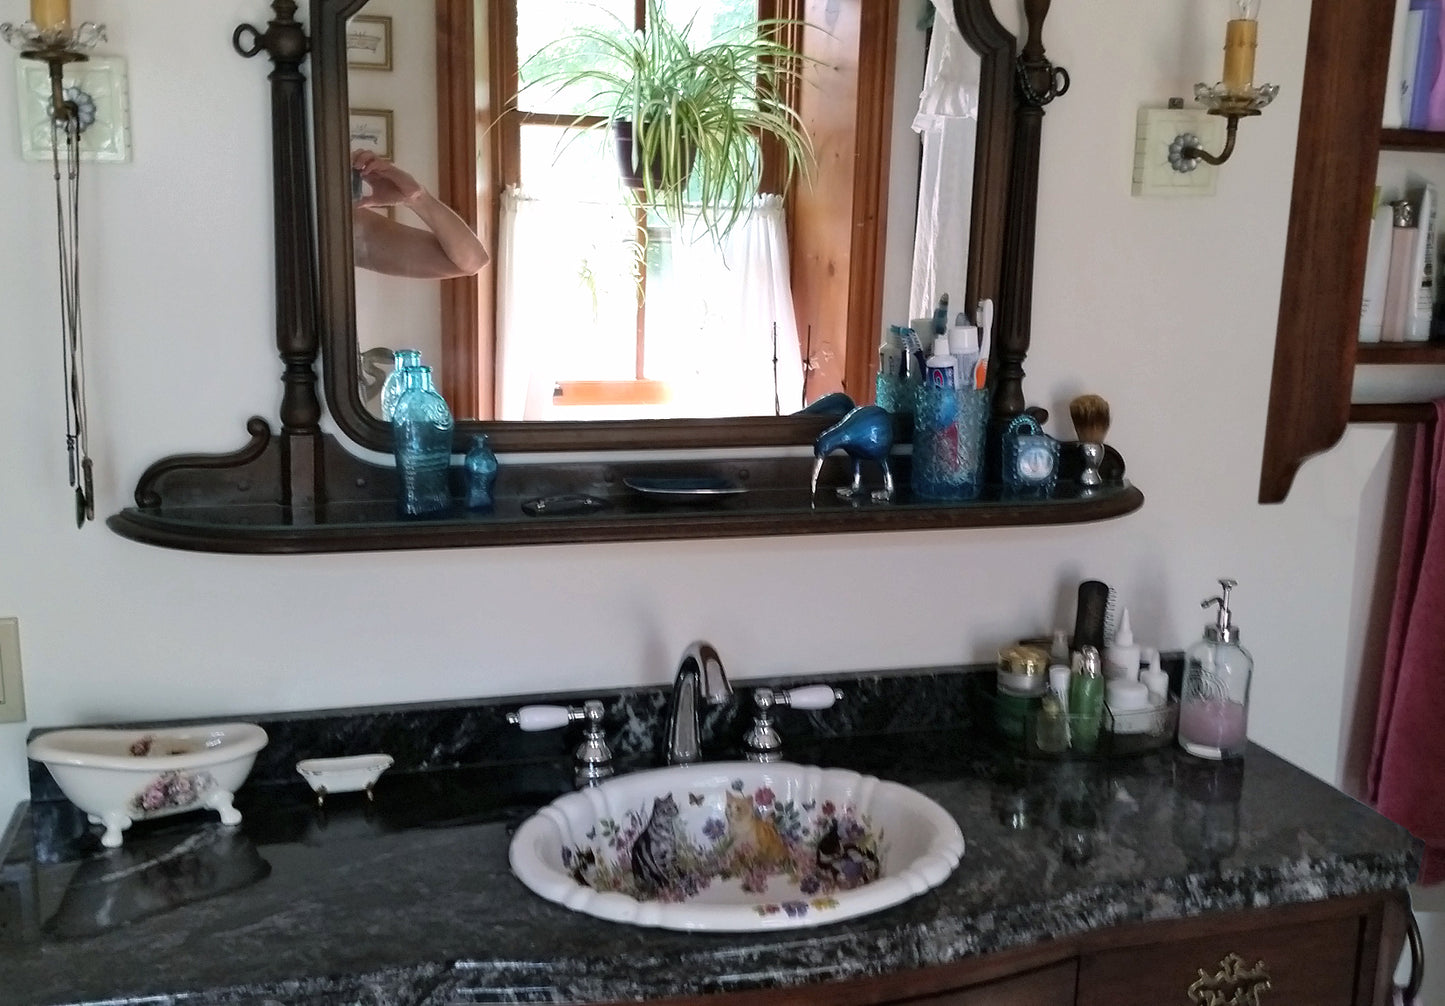 family bathroom with cats in the garden painted fluted bathroom sink.